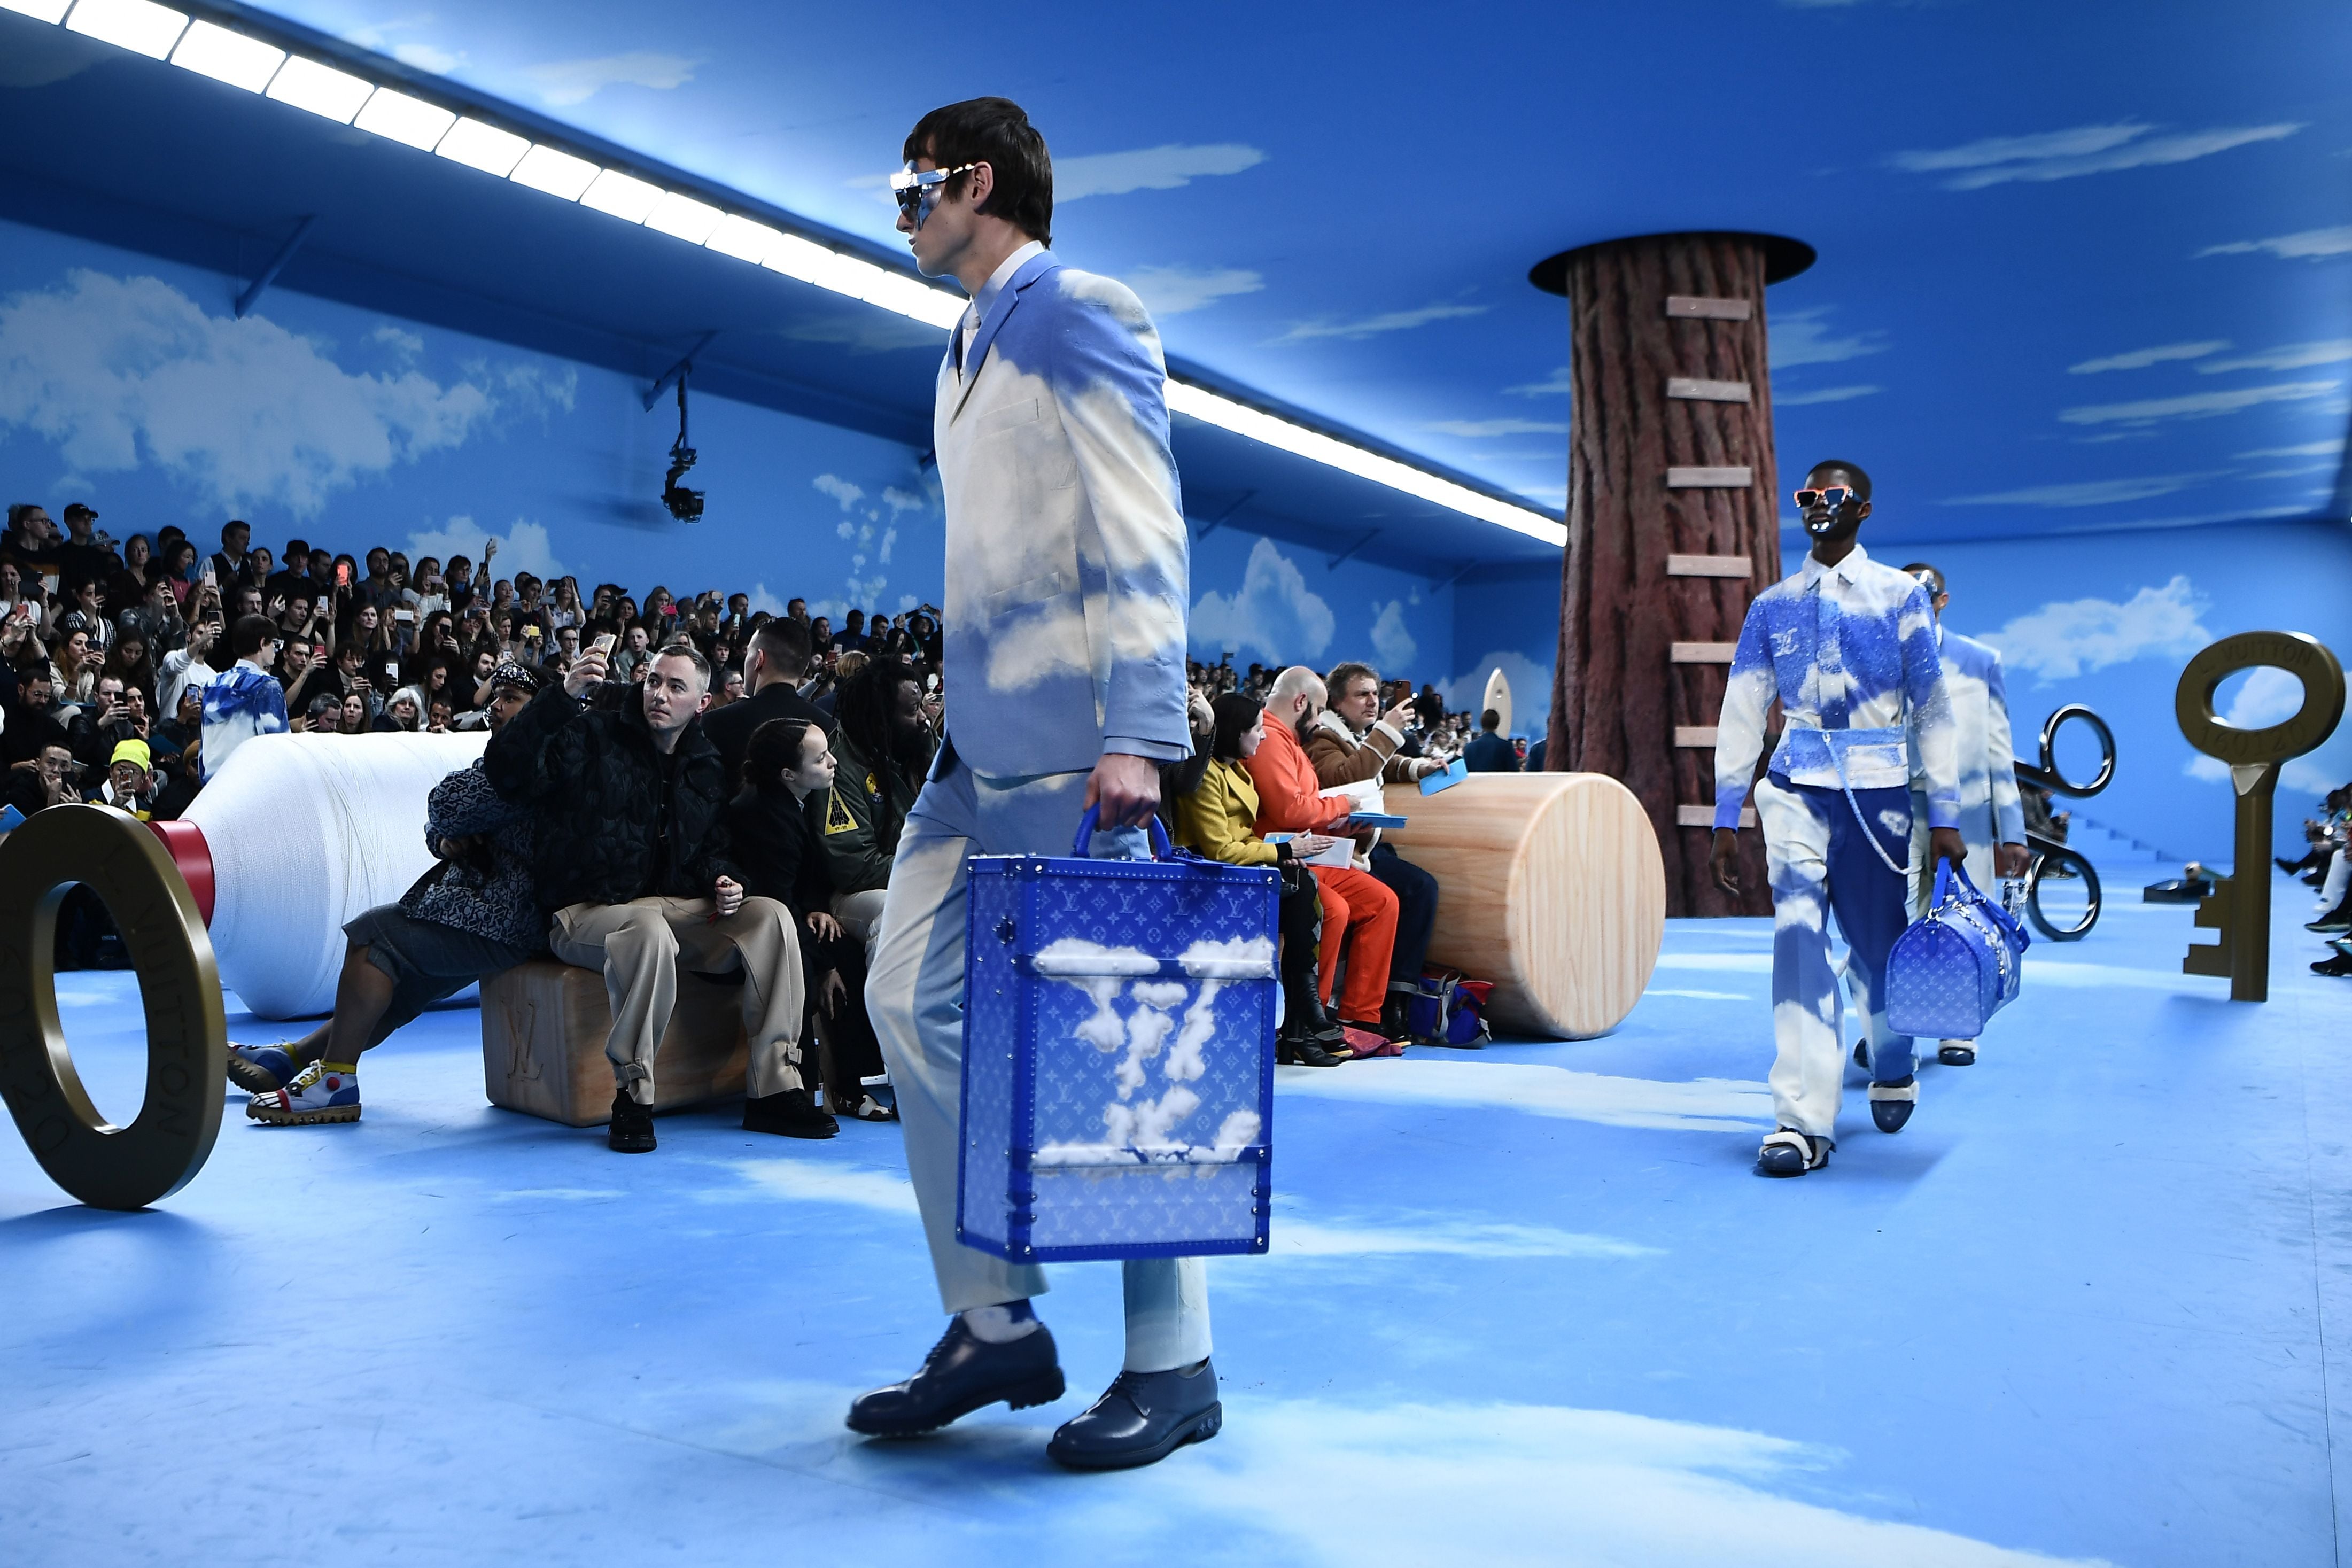 On cloud nine with Louis Vuitton